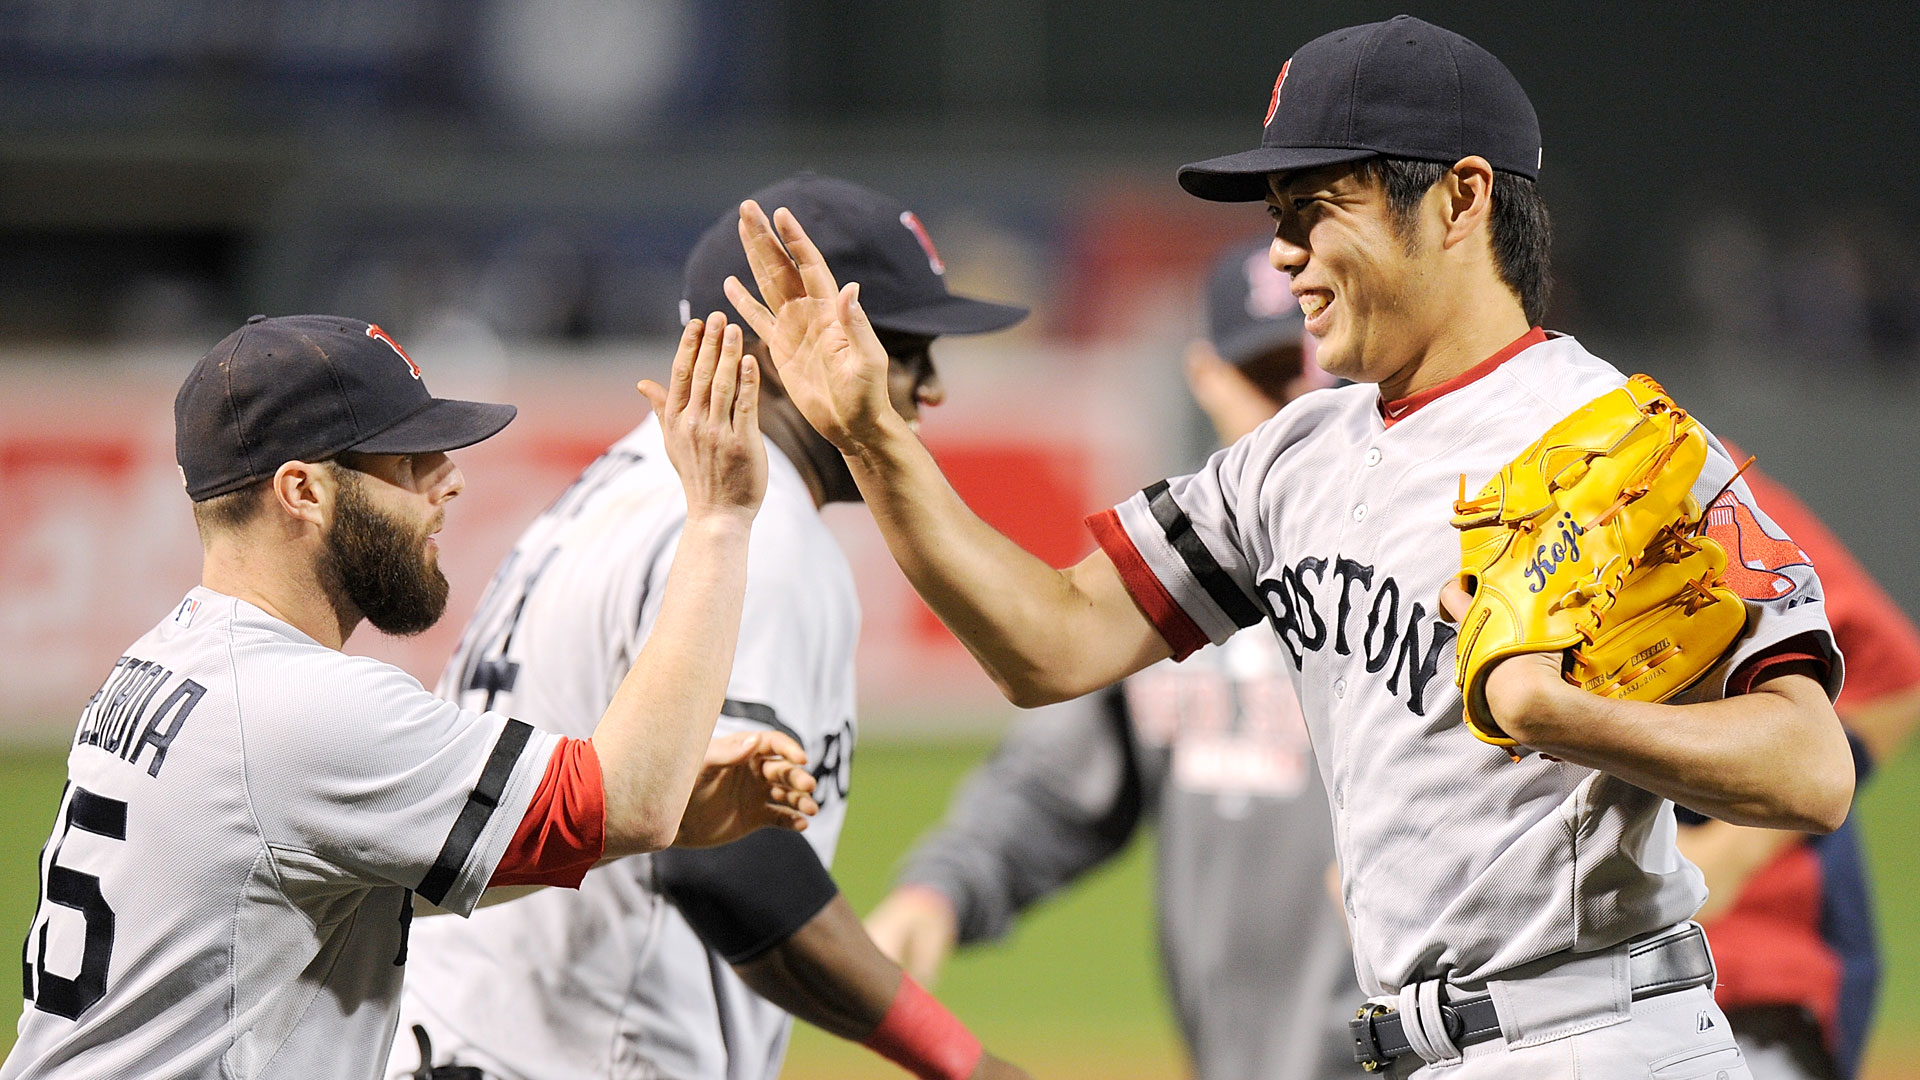 Red Sox reliever Koji Uehara gives the best high fives